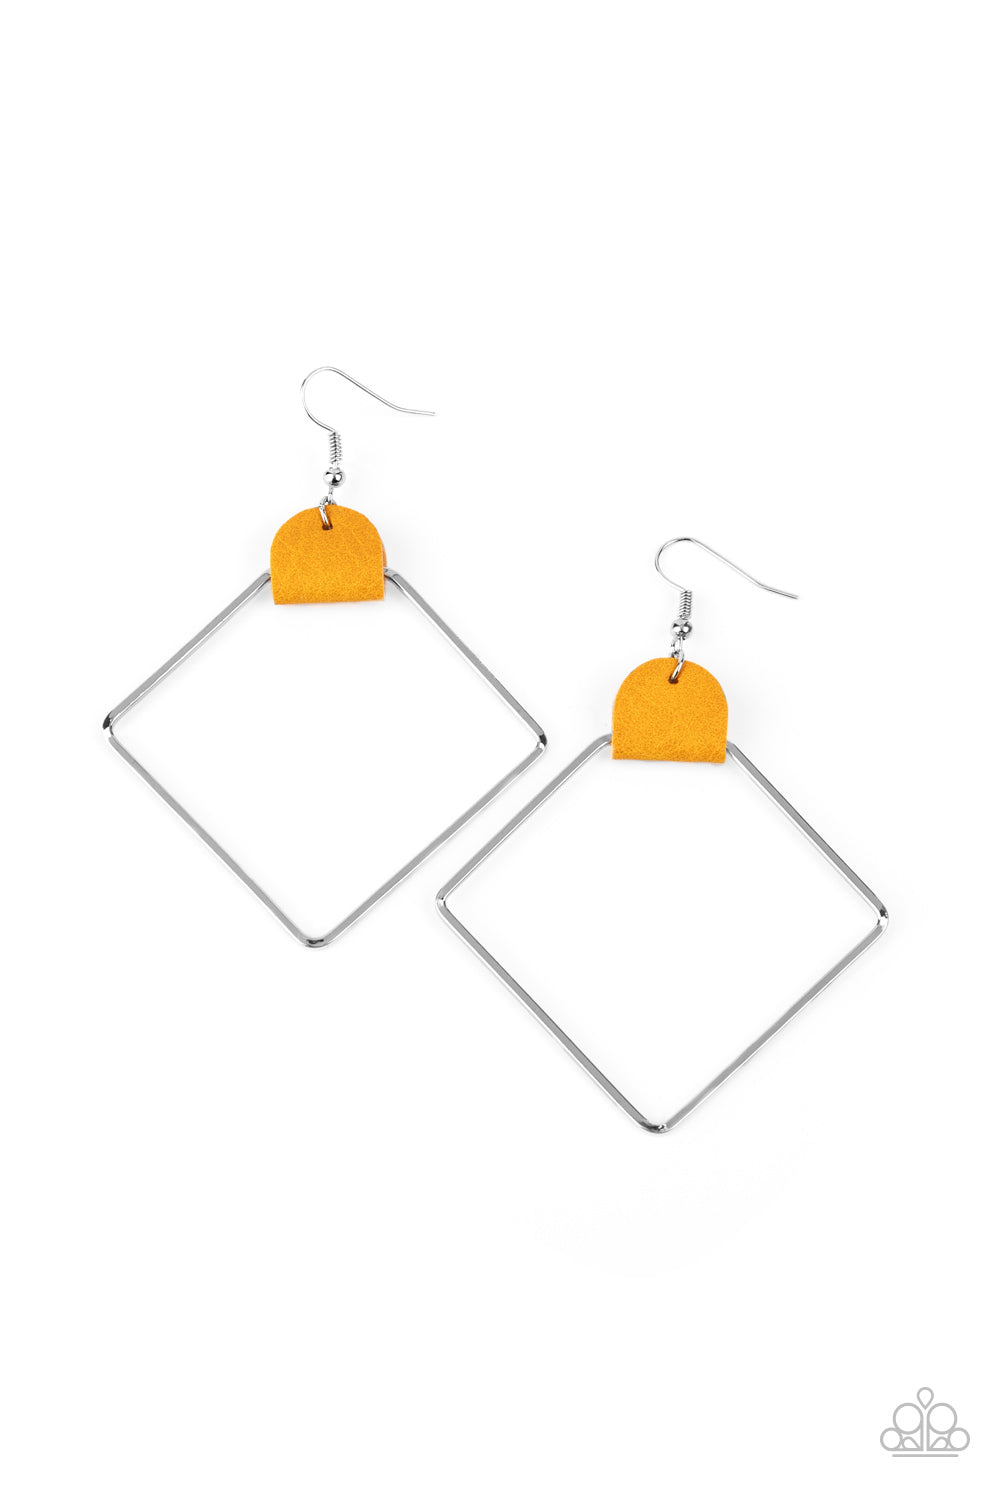 Friends of a LEATHER - Yellow earrings